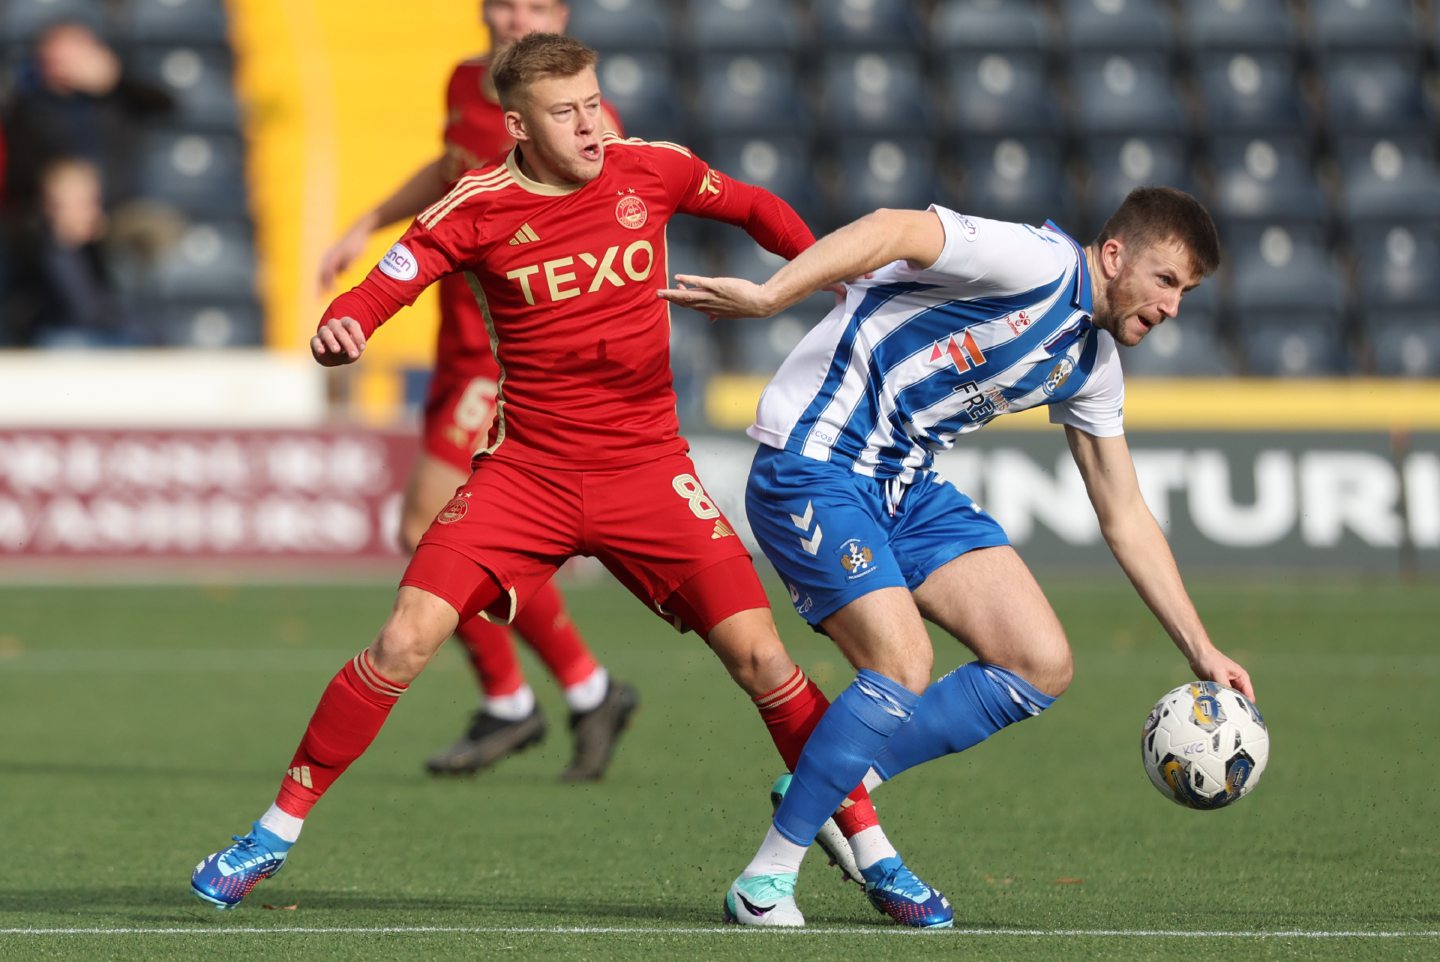 Aberdeen's Connor Barron and Kilmarnock's Liam Polworth in action